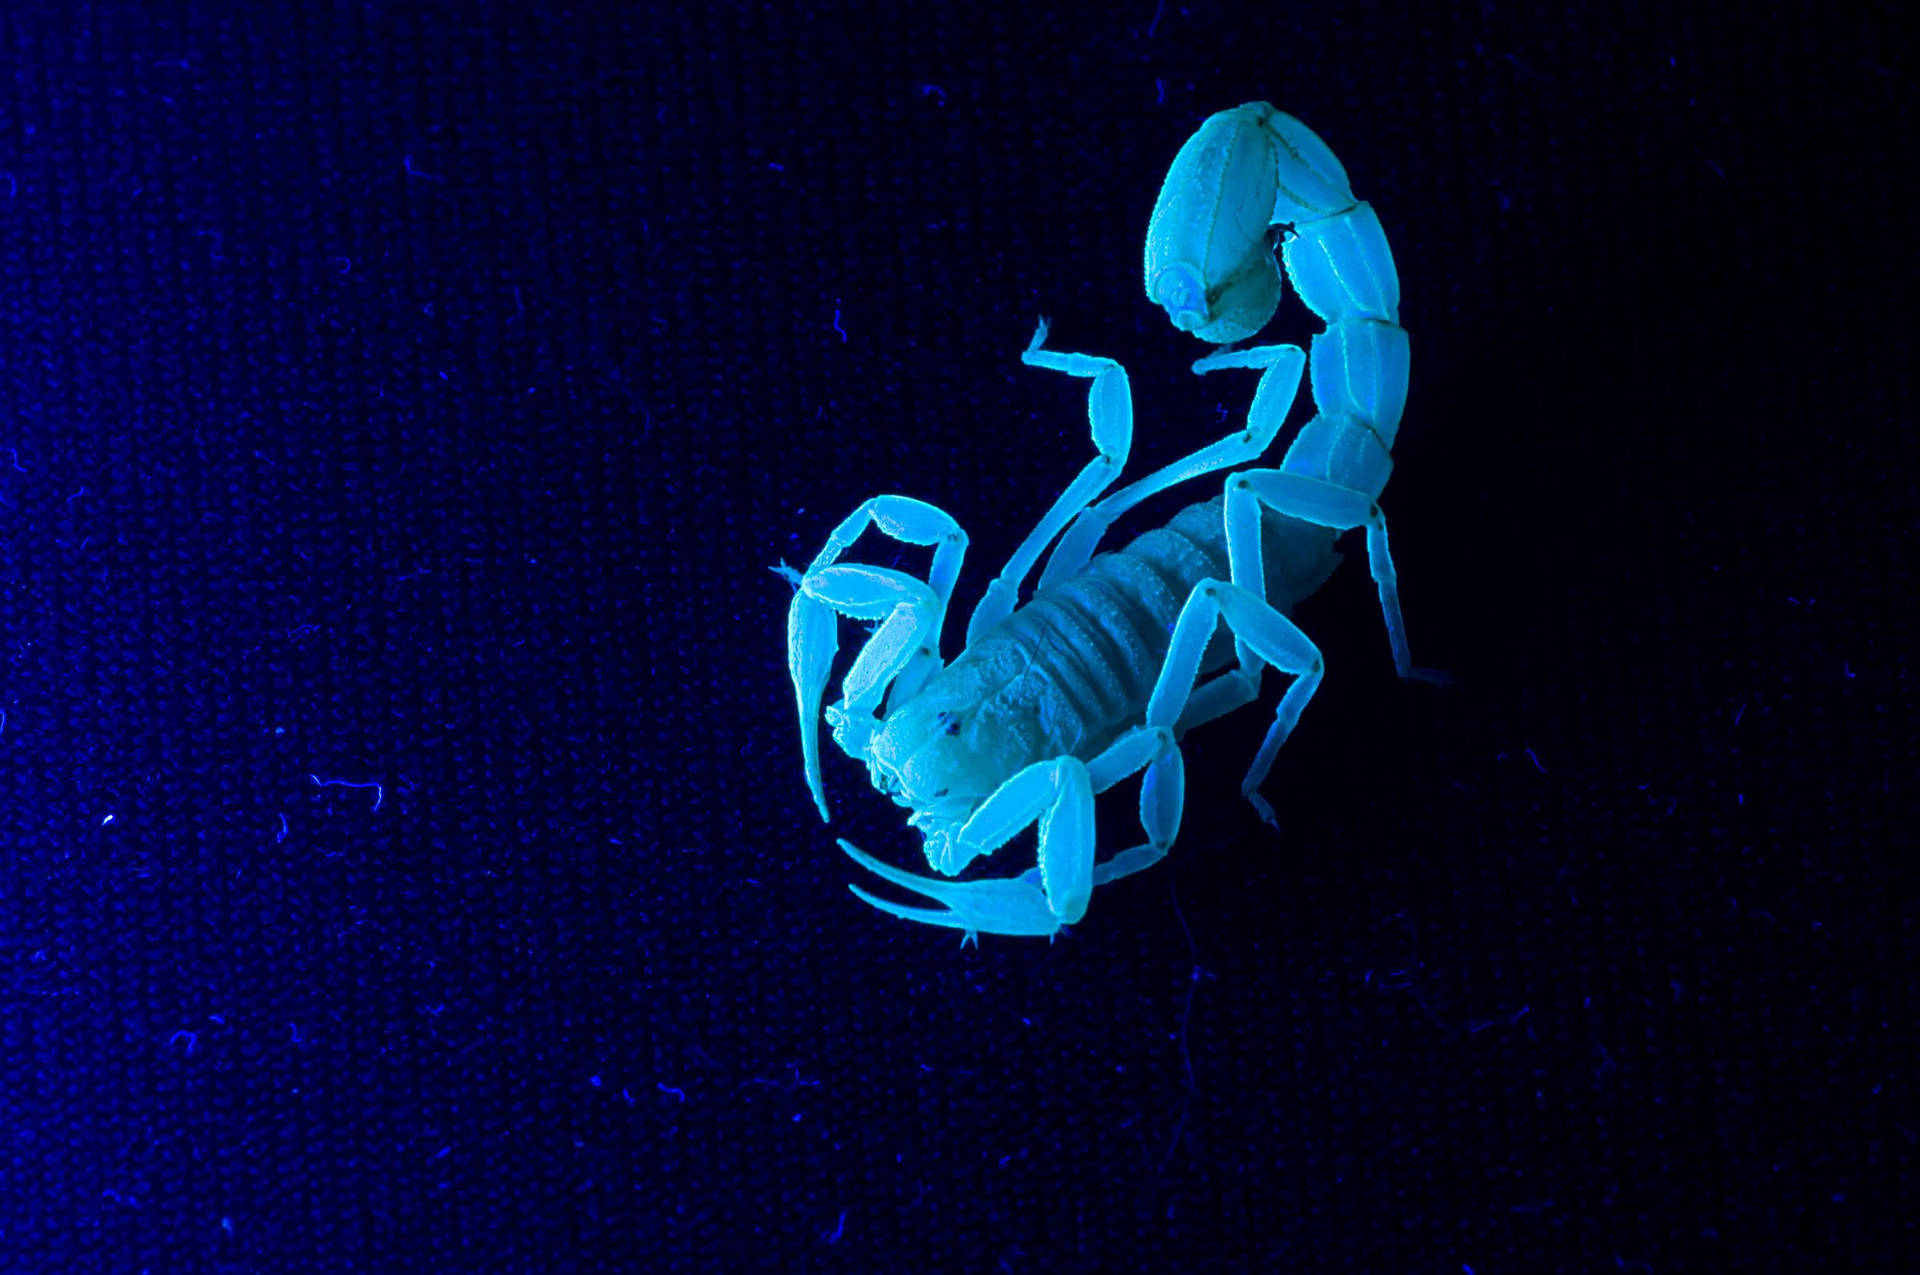 Scorpion (Animal) Wallpapers (31+ images inside)